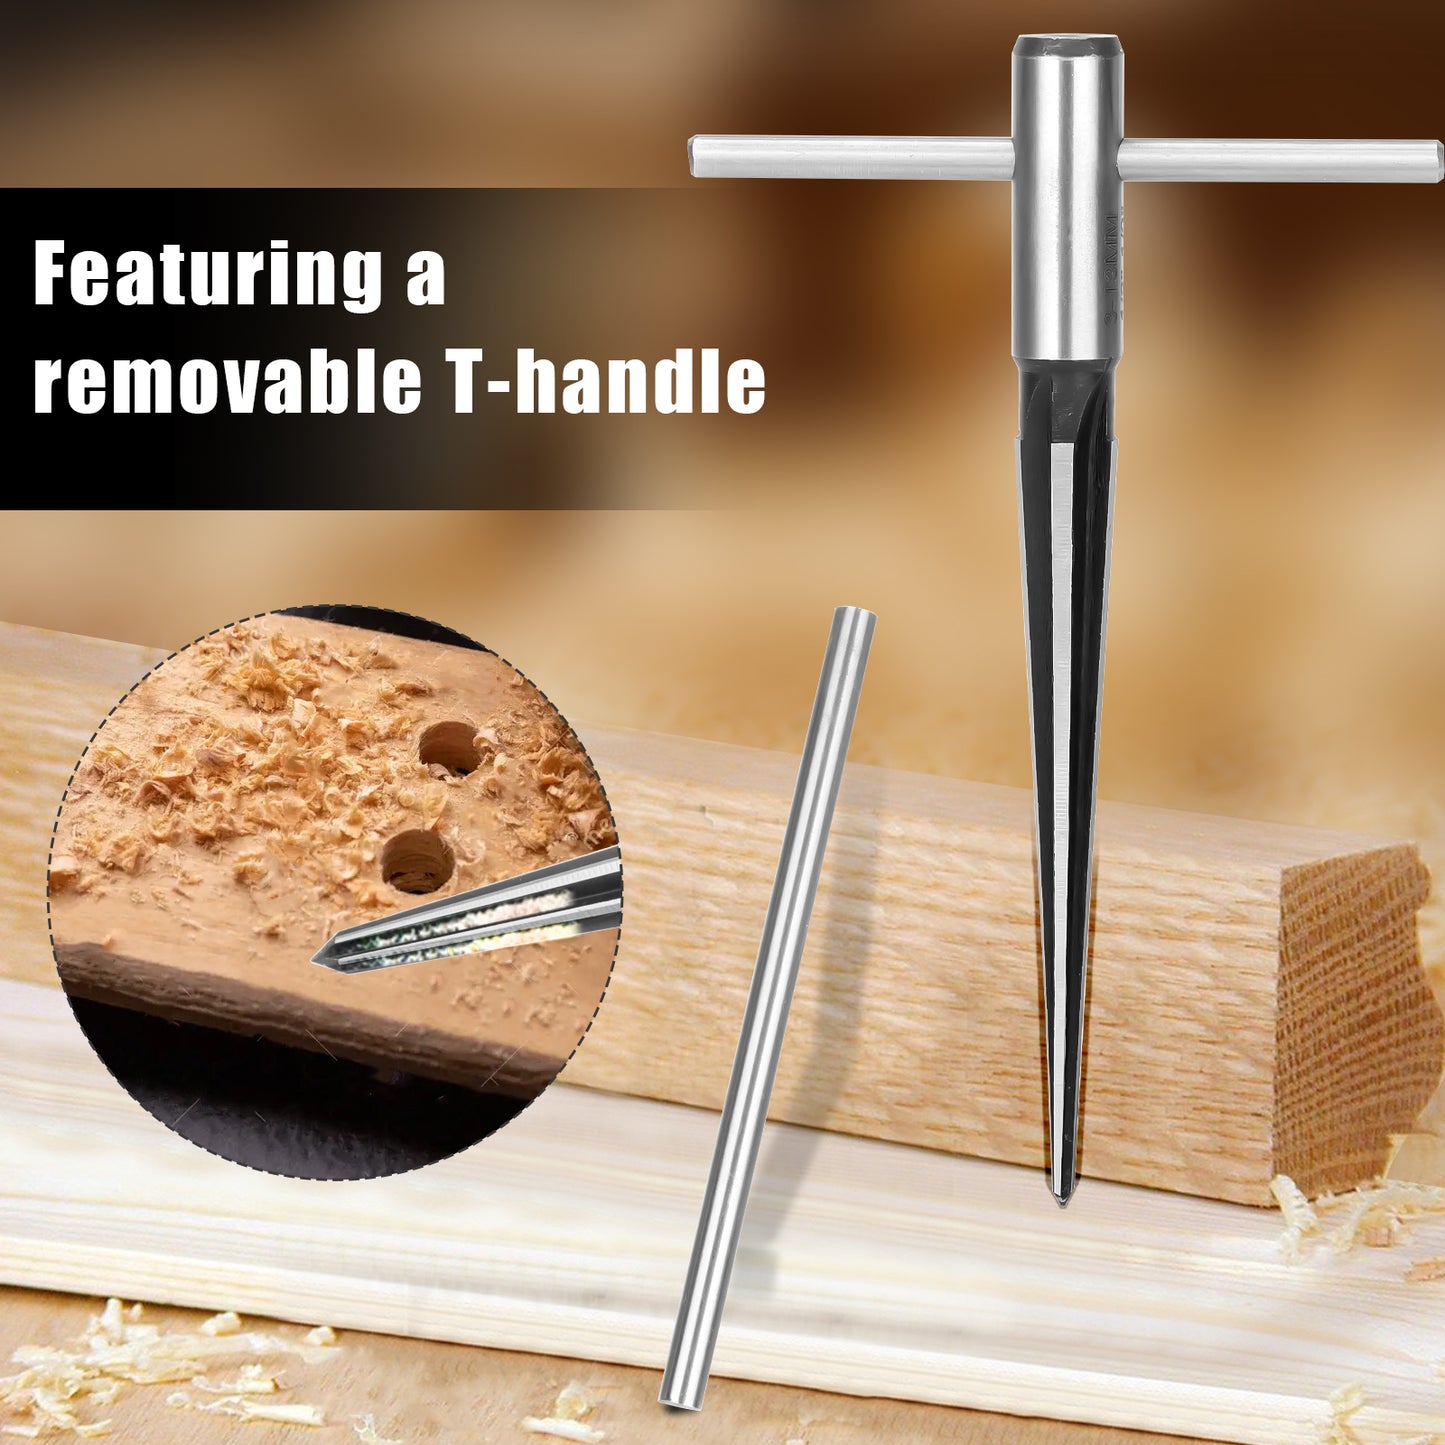 2pcs T Handle Tapered Reamer Set - (1/8 "-1/2 ")3-13mm and (3/16"-5/8" )5-16mm Bridge Pin Hole Hand Reamers,Detachable Metal Taper Reamer Tool,Ideal for reaming holes in metal sheets and plastic